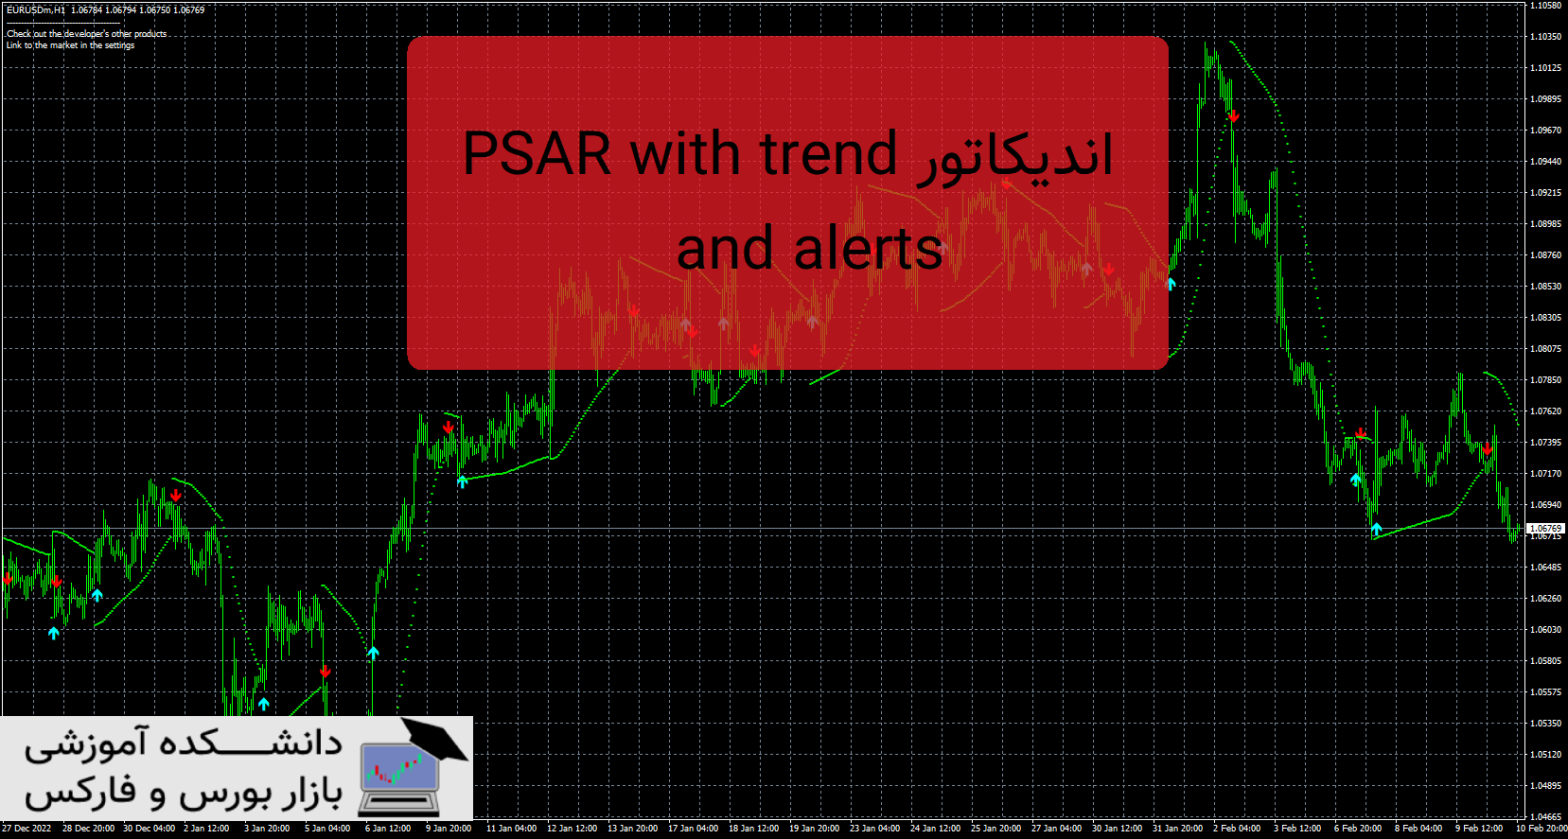 PSAR with trend and alerts دانلود و معرفی اندیکاتور